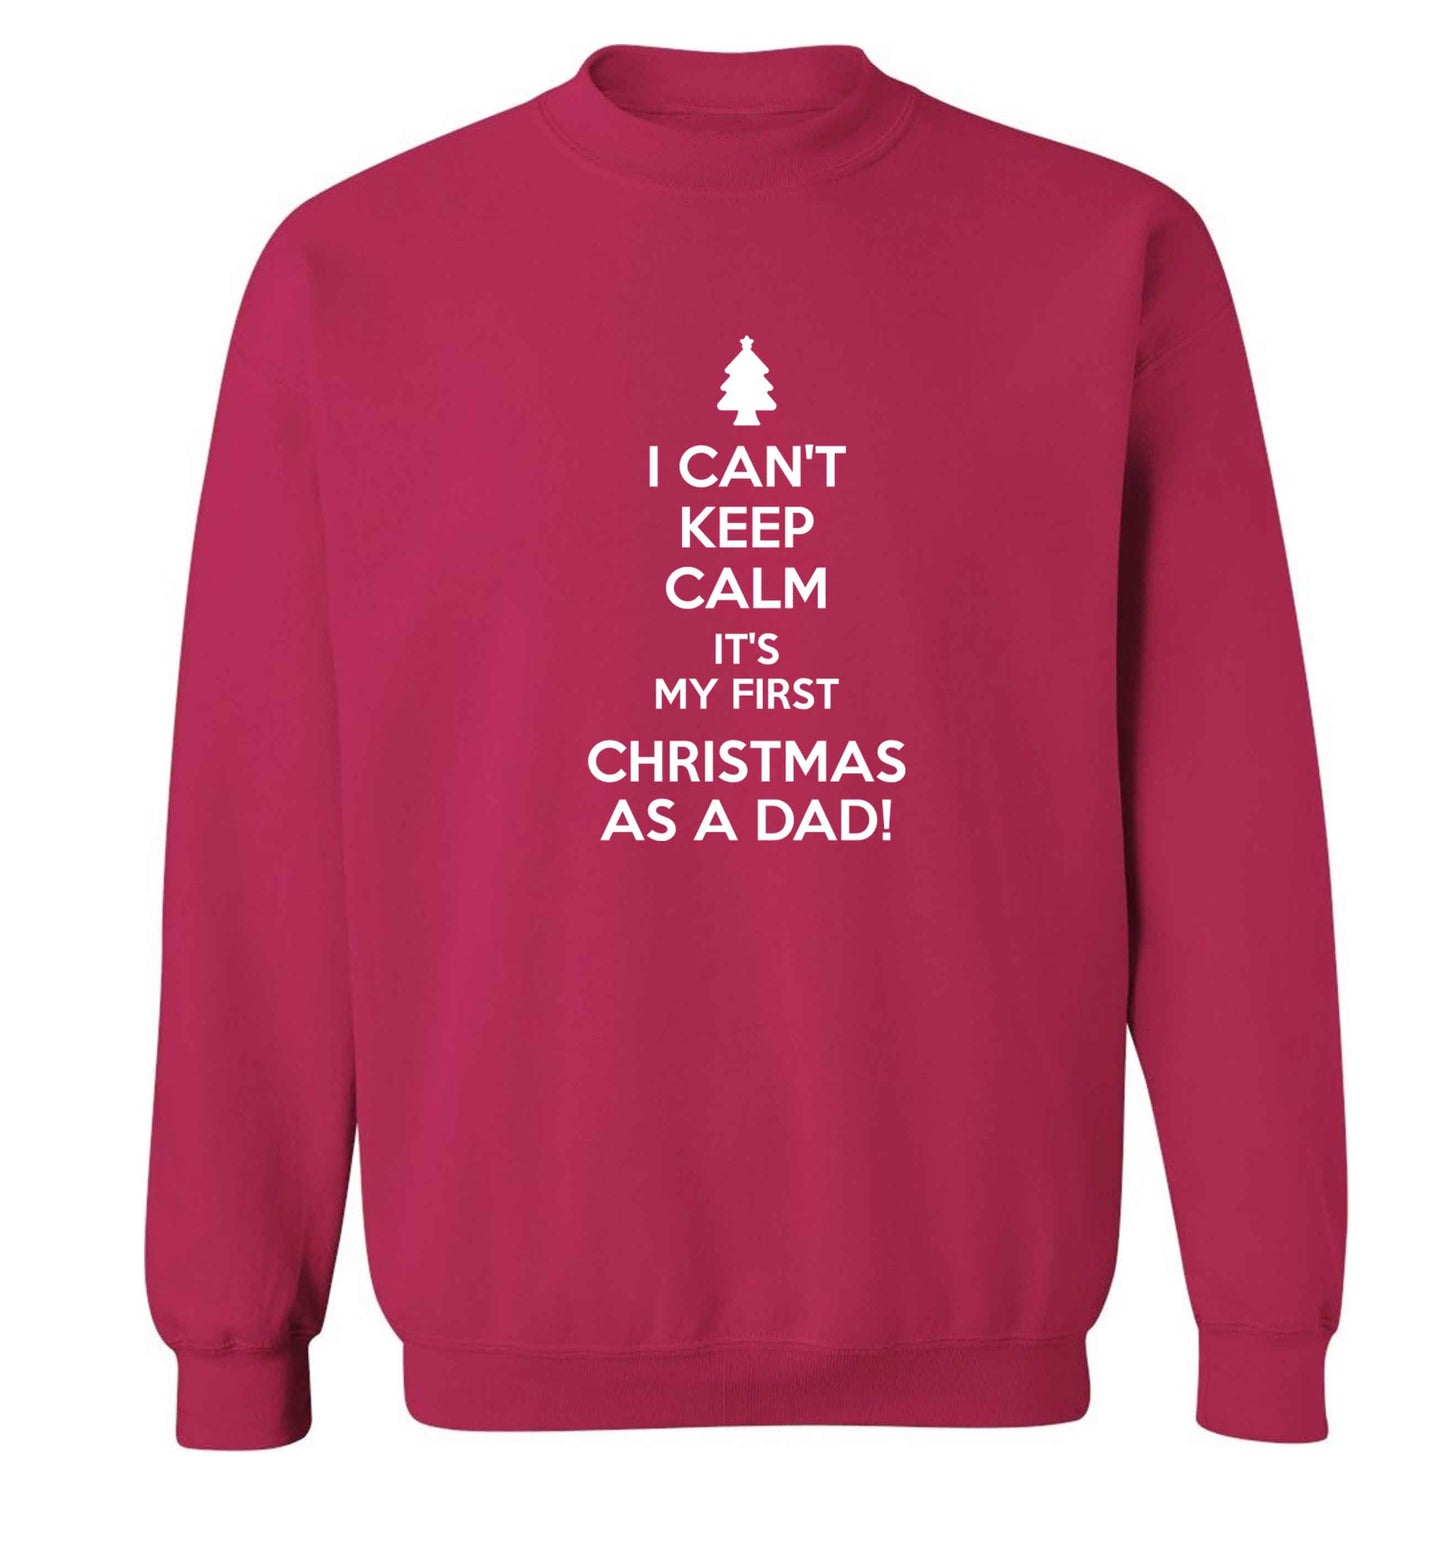 I can't keep calm it's my first Christmas as a dad Adult's unisex pink Sweater 2XL